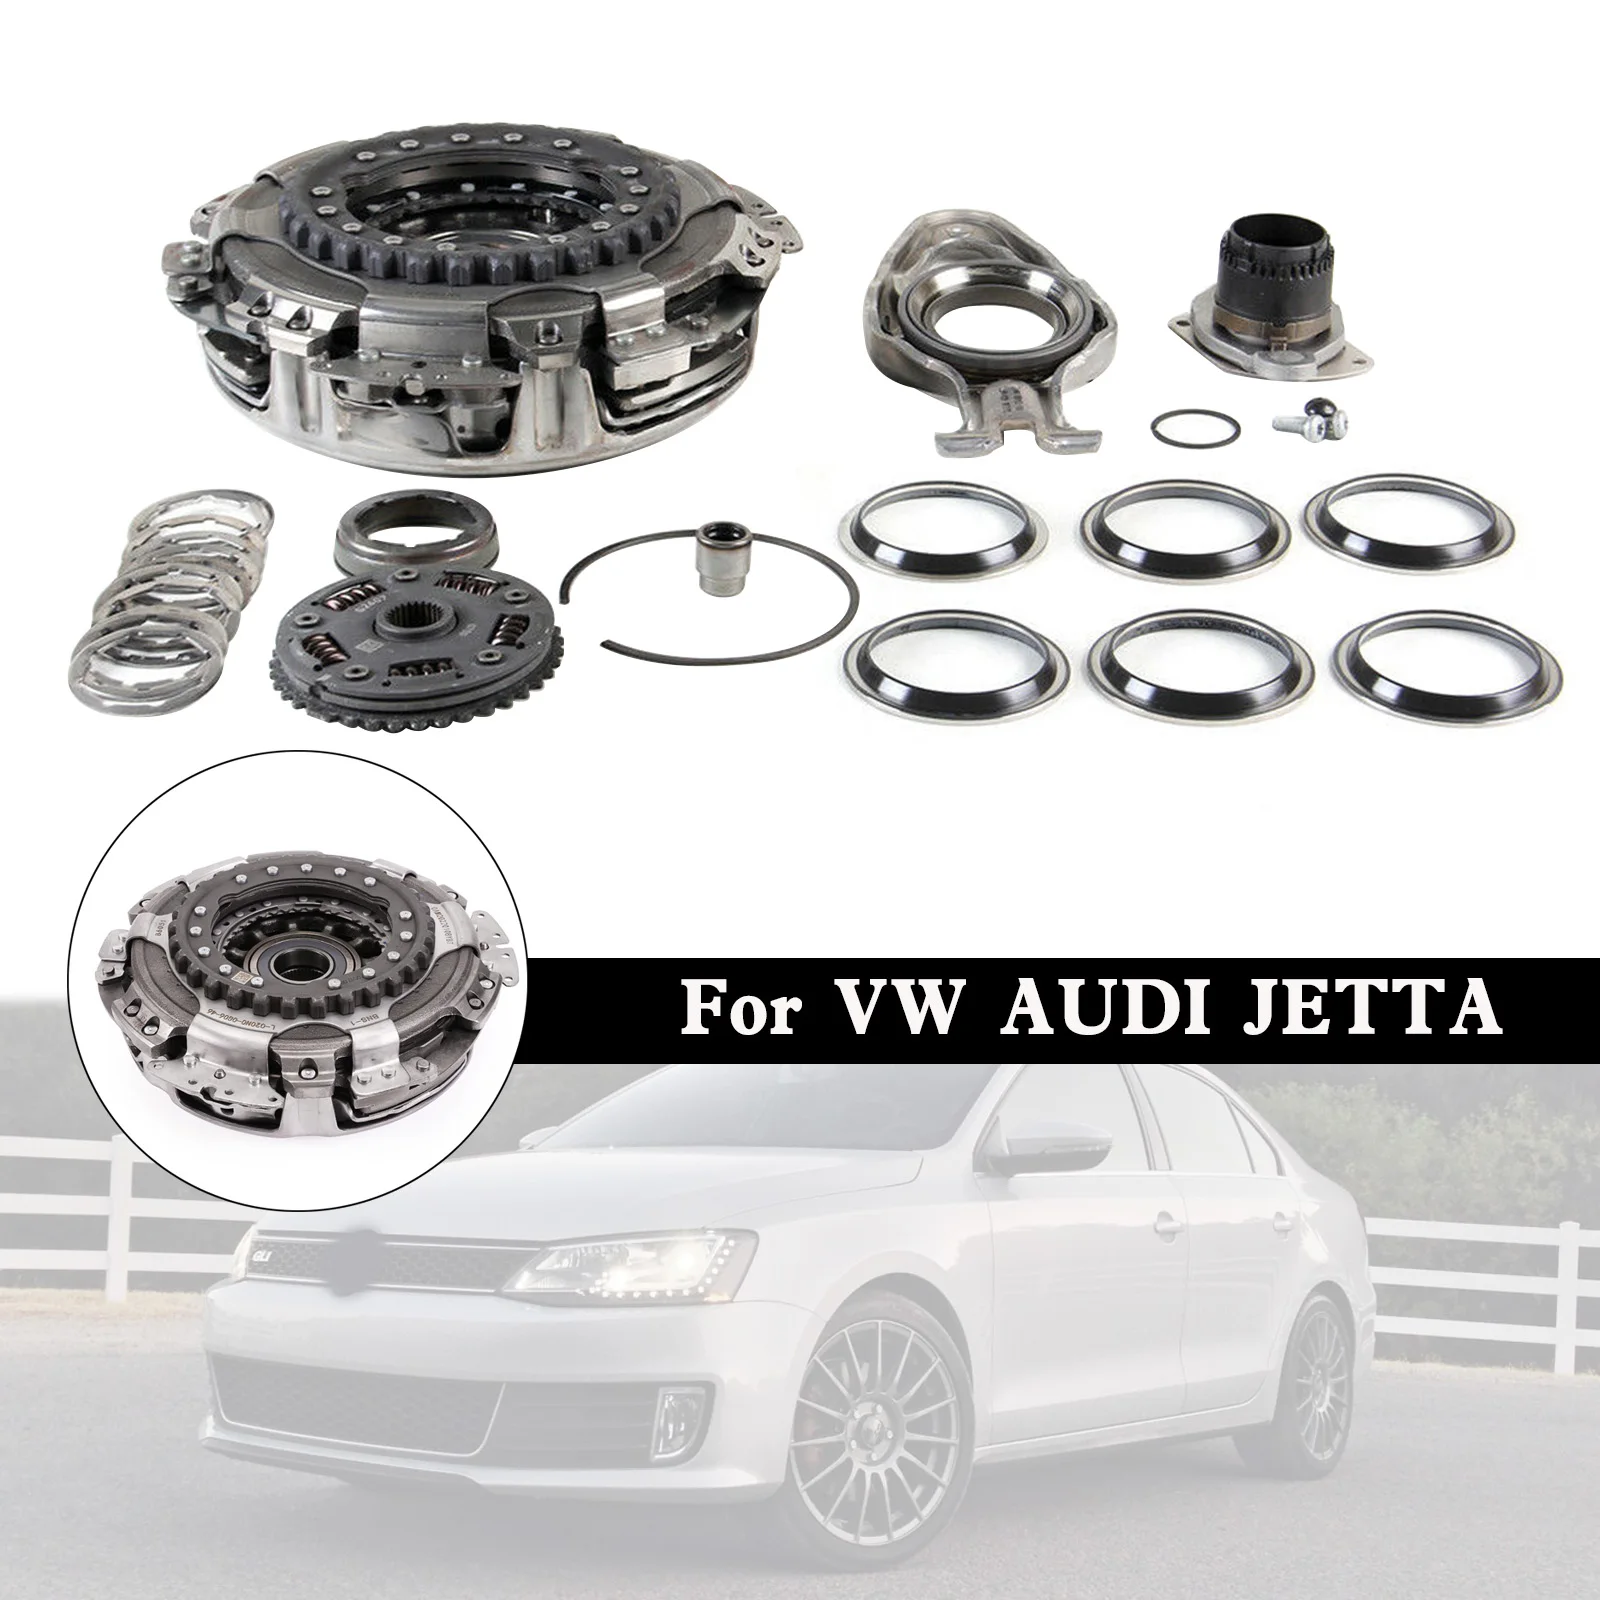 

Artudatech 0AM DQ200 DSG 7 Speed Transmission Clutch With Fork New Model For VW AUDI JETTA Car Accessories